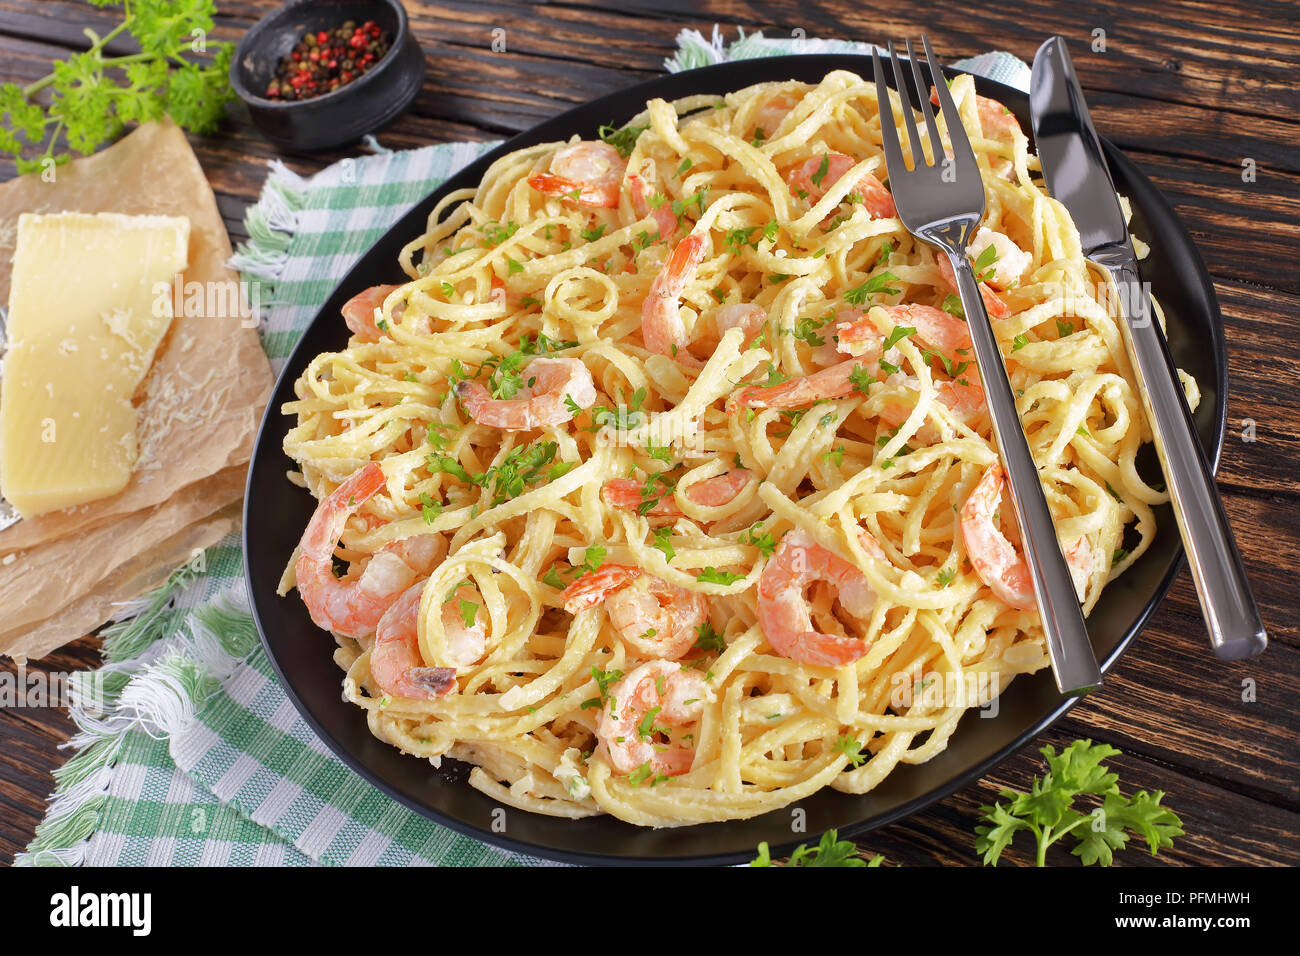 close-up of portion of Creamy Parmesan Shrimp pasta sprinkled with finely chopped parsley on black plate on wooden rustic table. piece of parmesan and Stock Photo